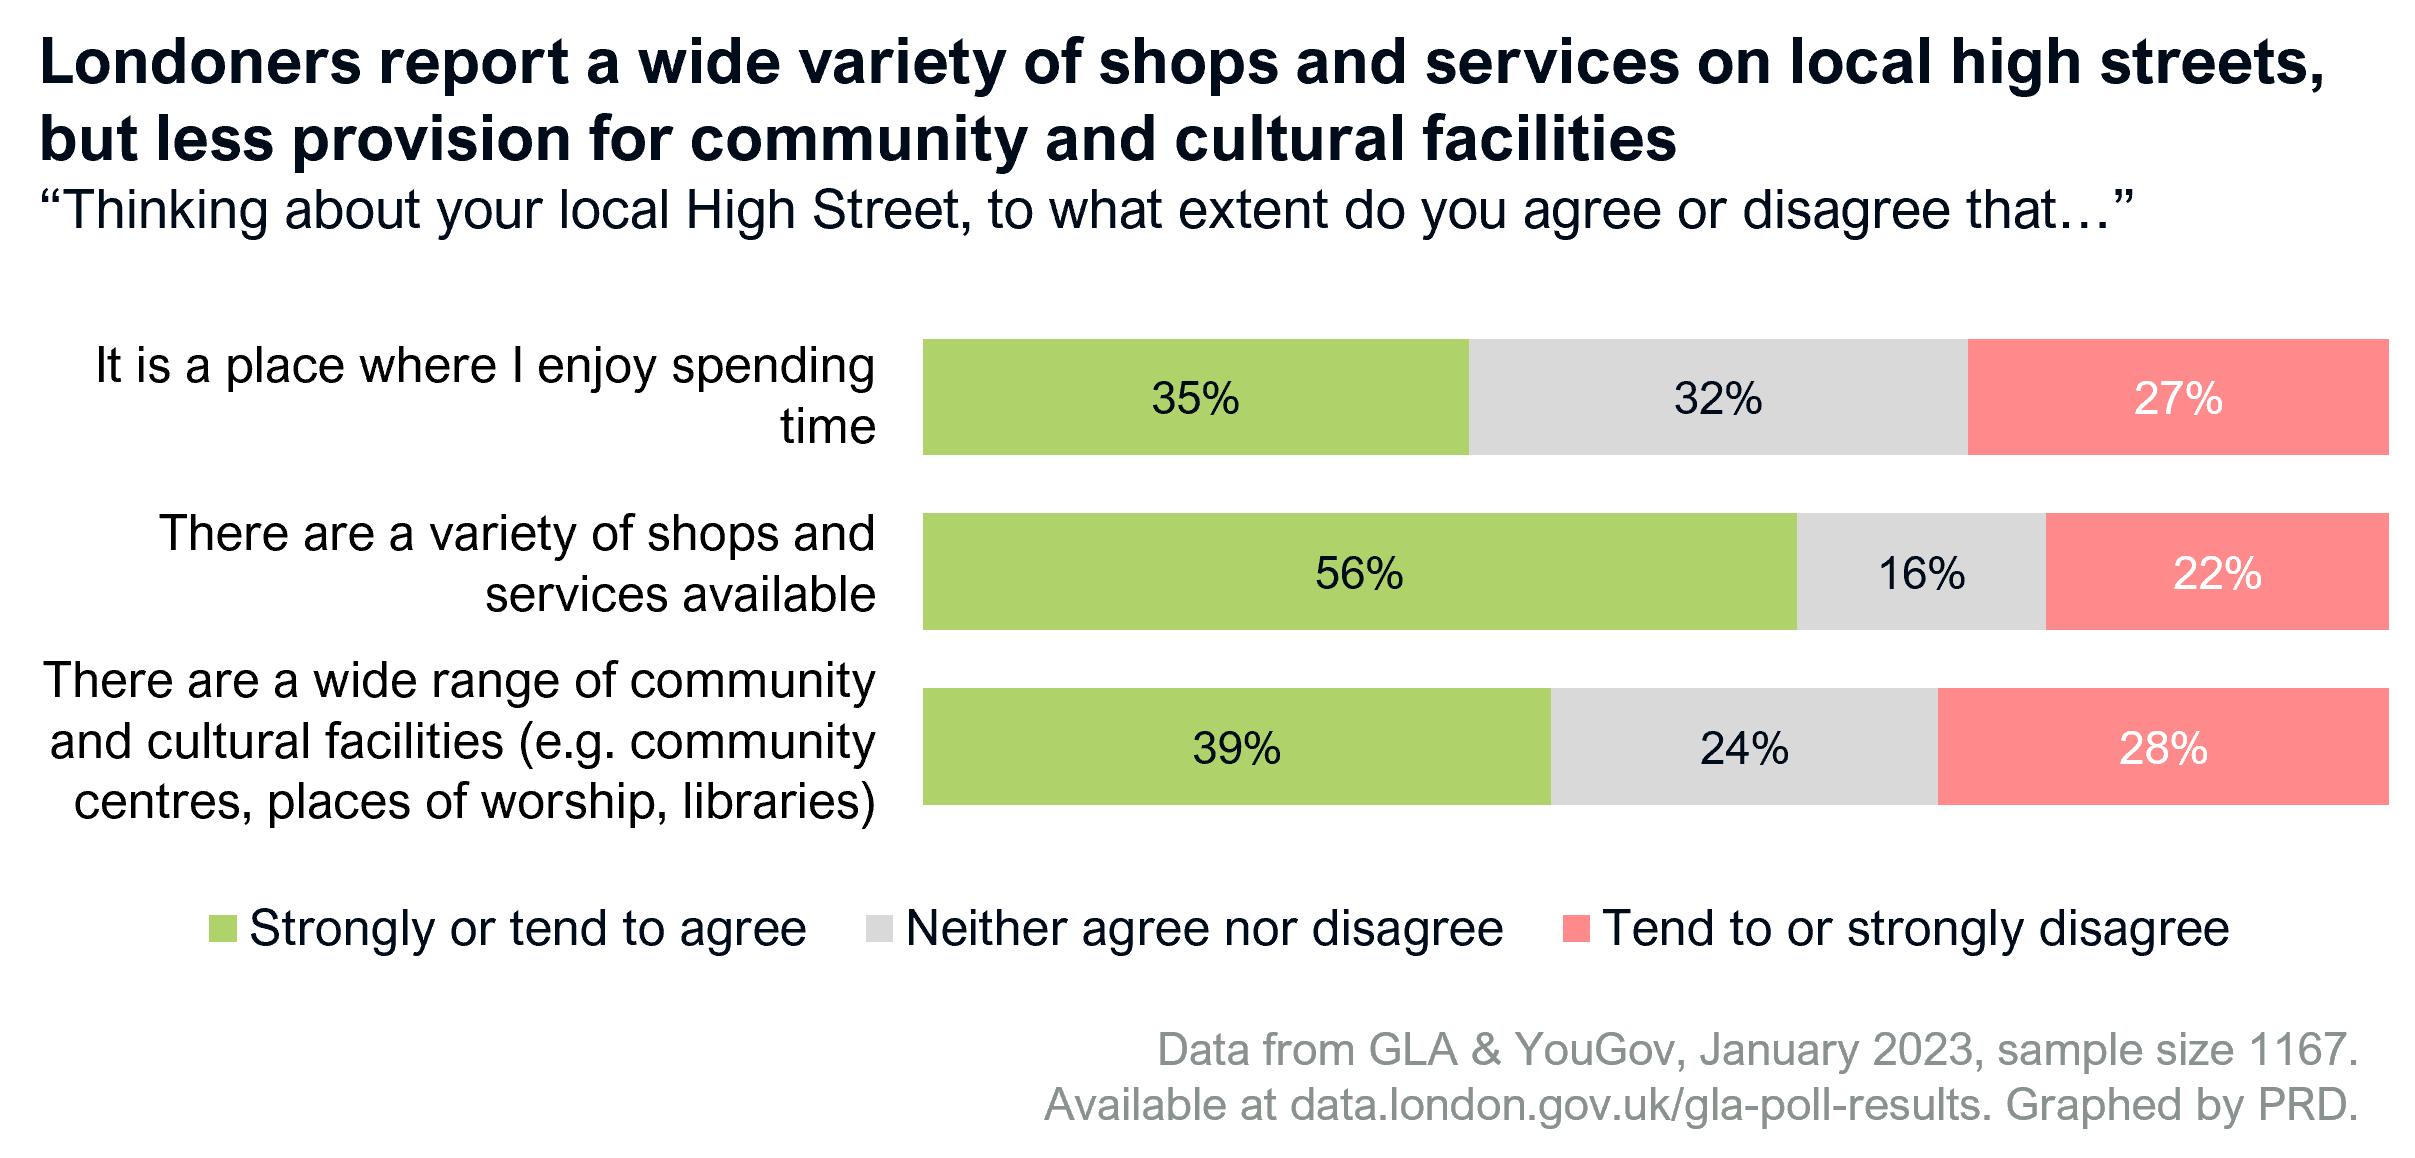 A bar graph showing responses from 1167 Londoners to the questions of whether they enjoy spending time in their local high street (35% agree, 27% disagree); whether the high street has a variety of shops and services (56% agree, 22% disagree); and whether there is a wide range of community and cultural facilities (39% agree, 28% disagree)